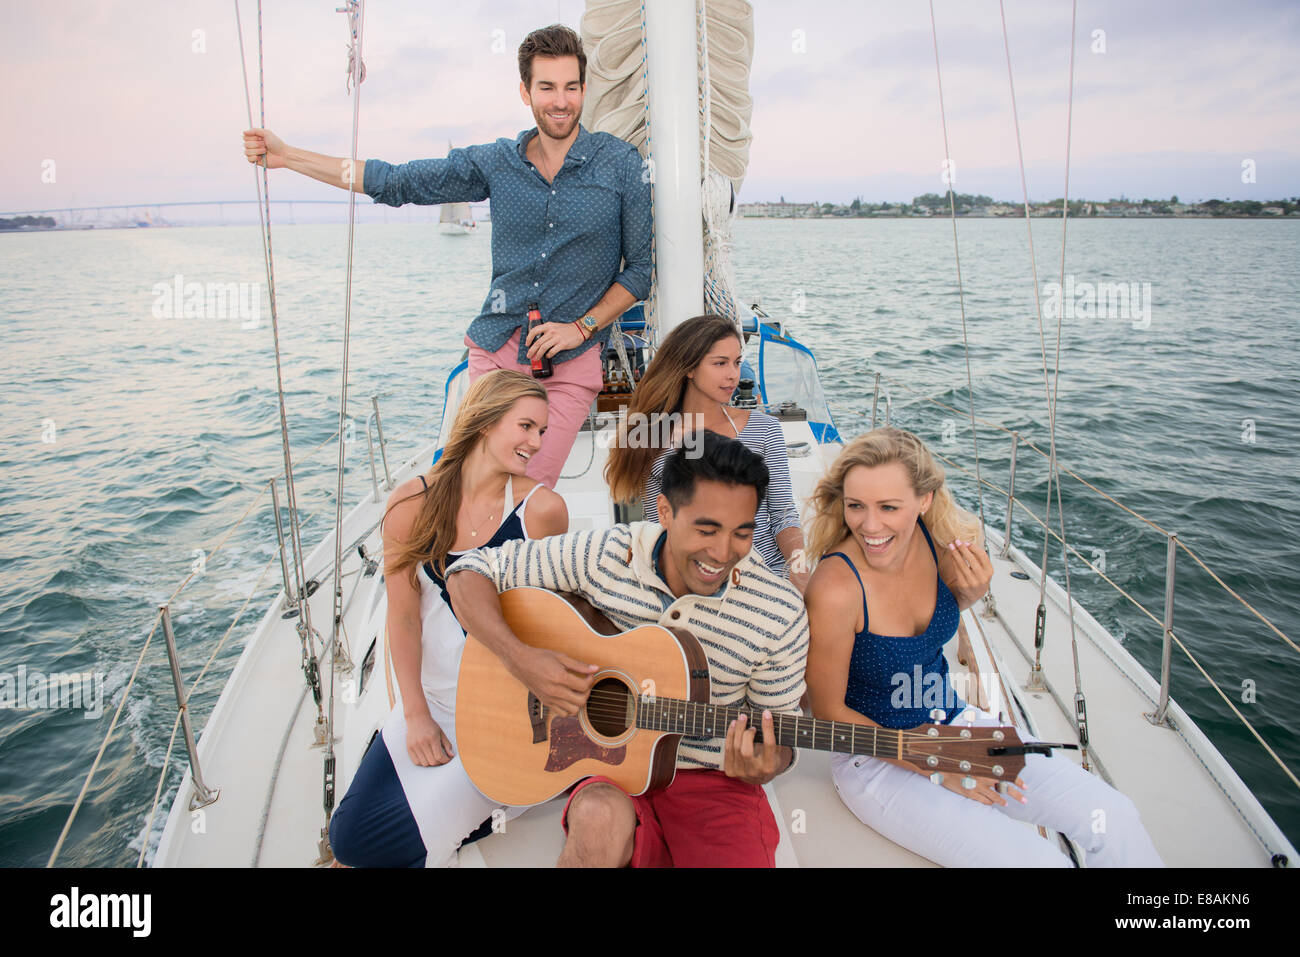 Friends on sailing boat, man playing guitar Stock Photo